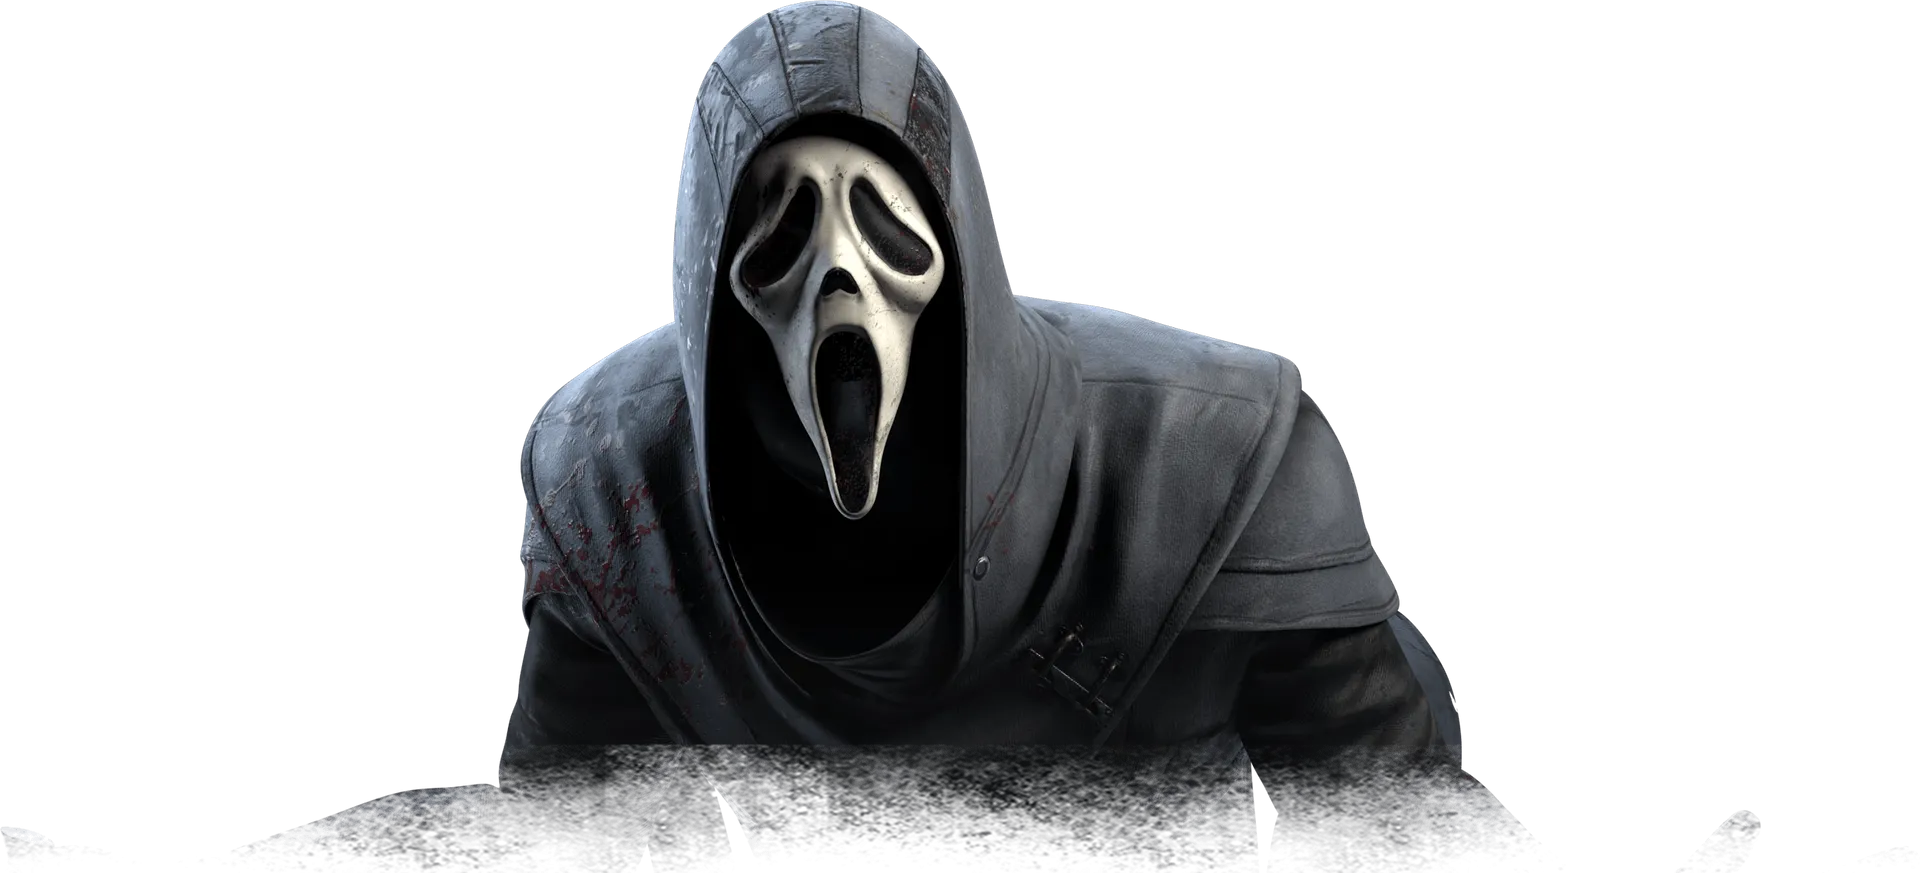 Dead by Daylight Danny Jed Olsen Johnson The Gost Face Ghostface